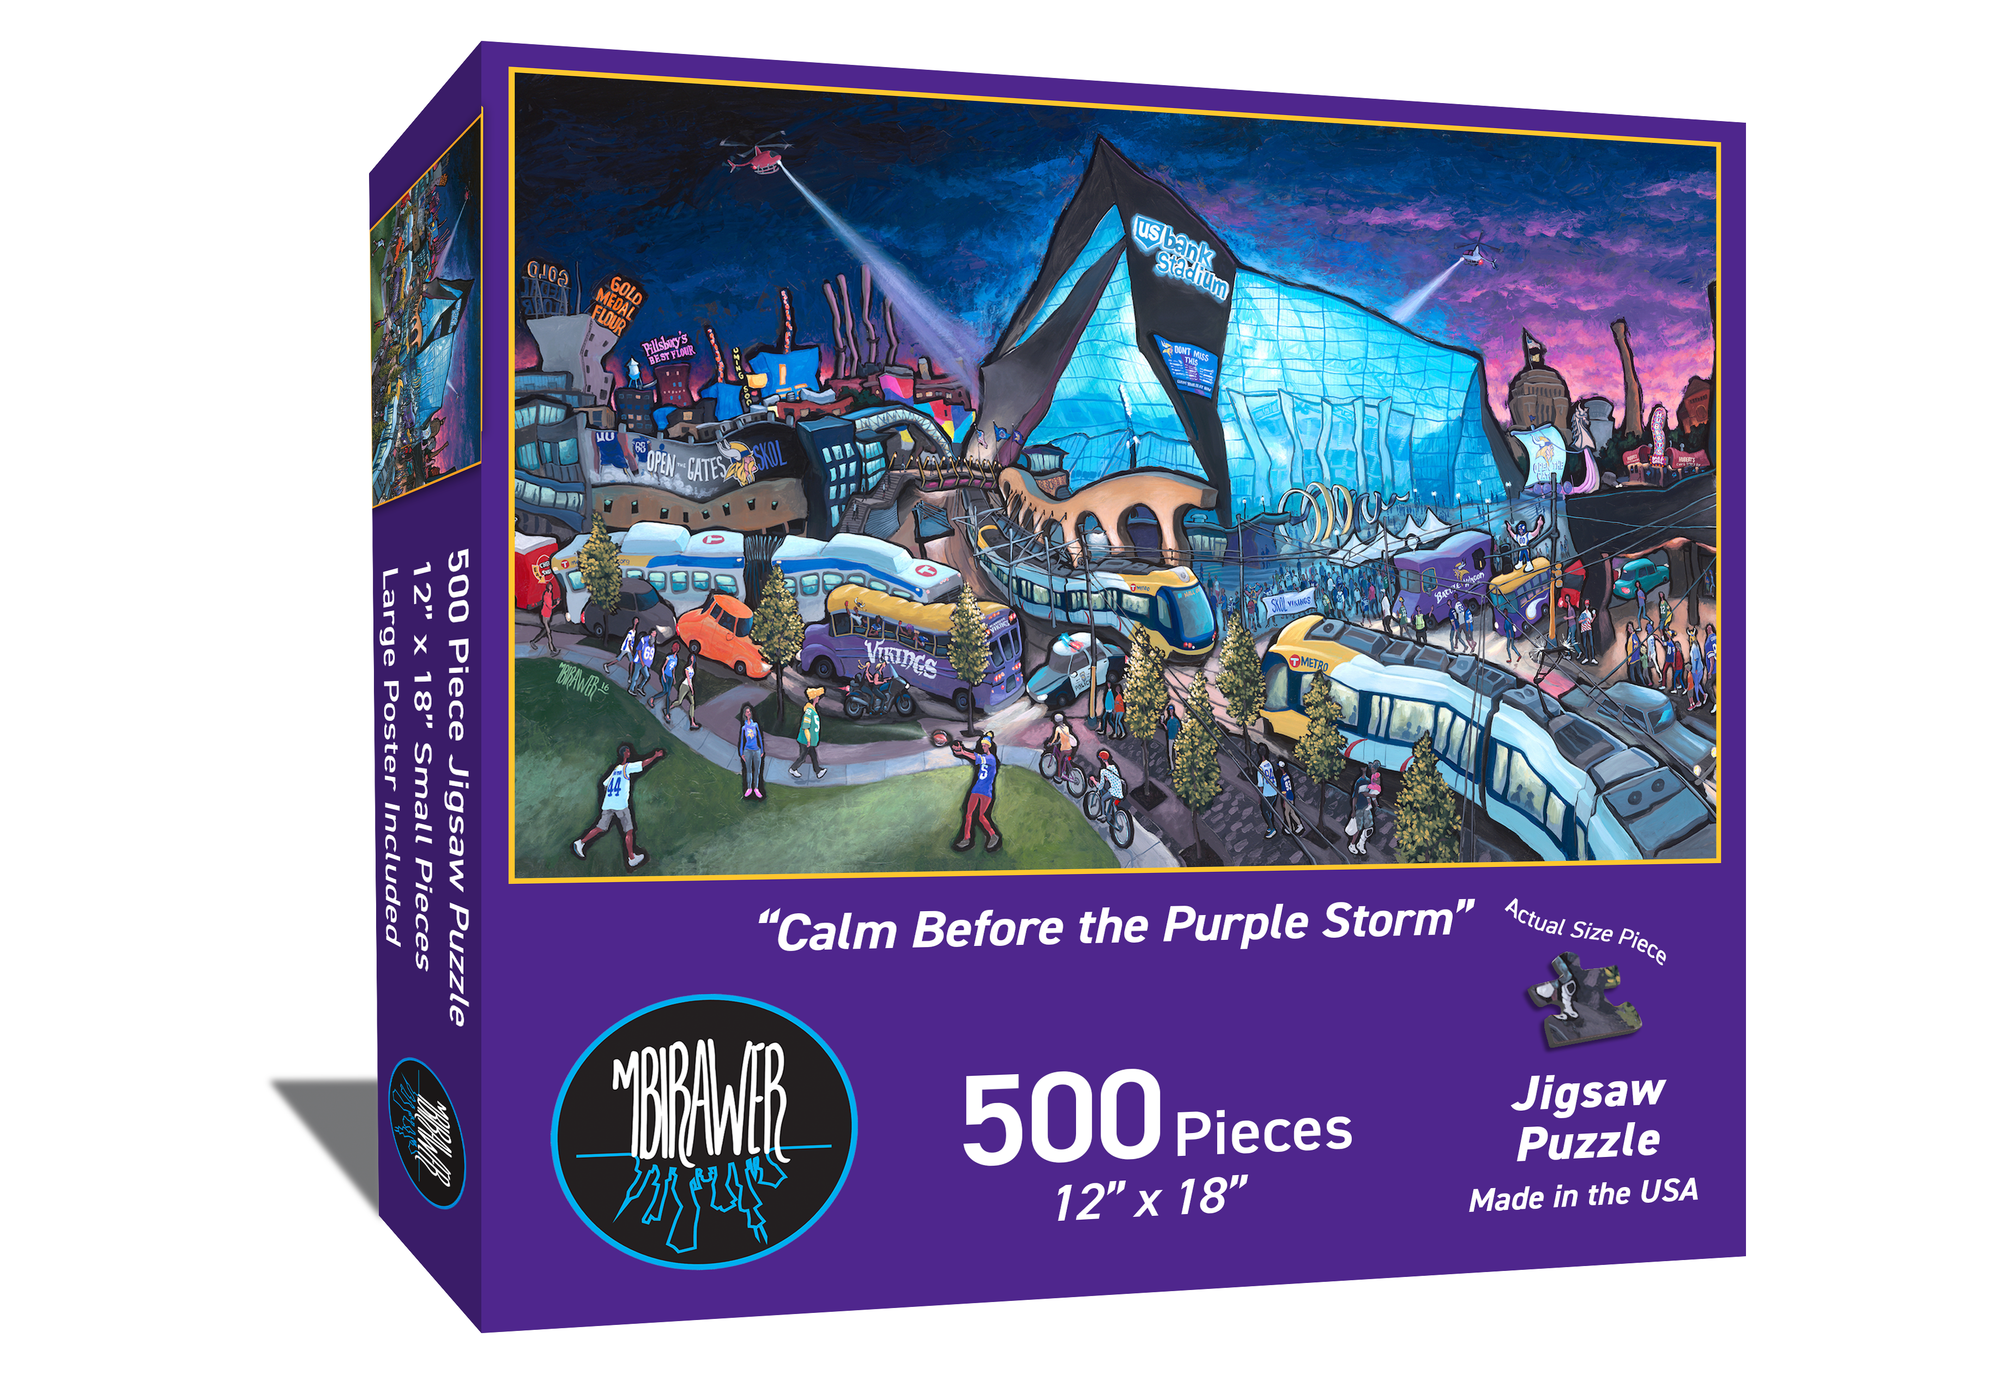 "Calm Before the Purple Storm" 12"x18" Puzzle